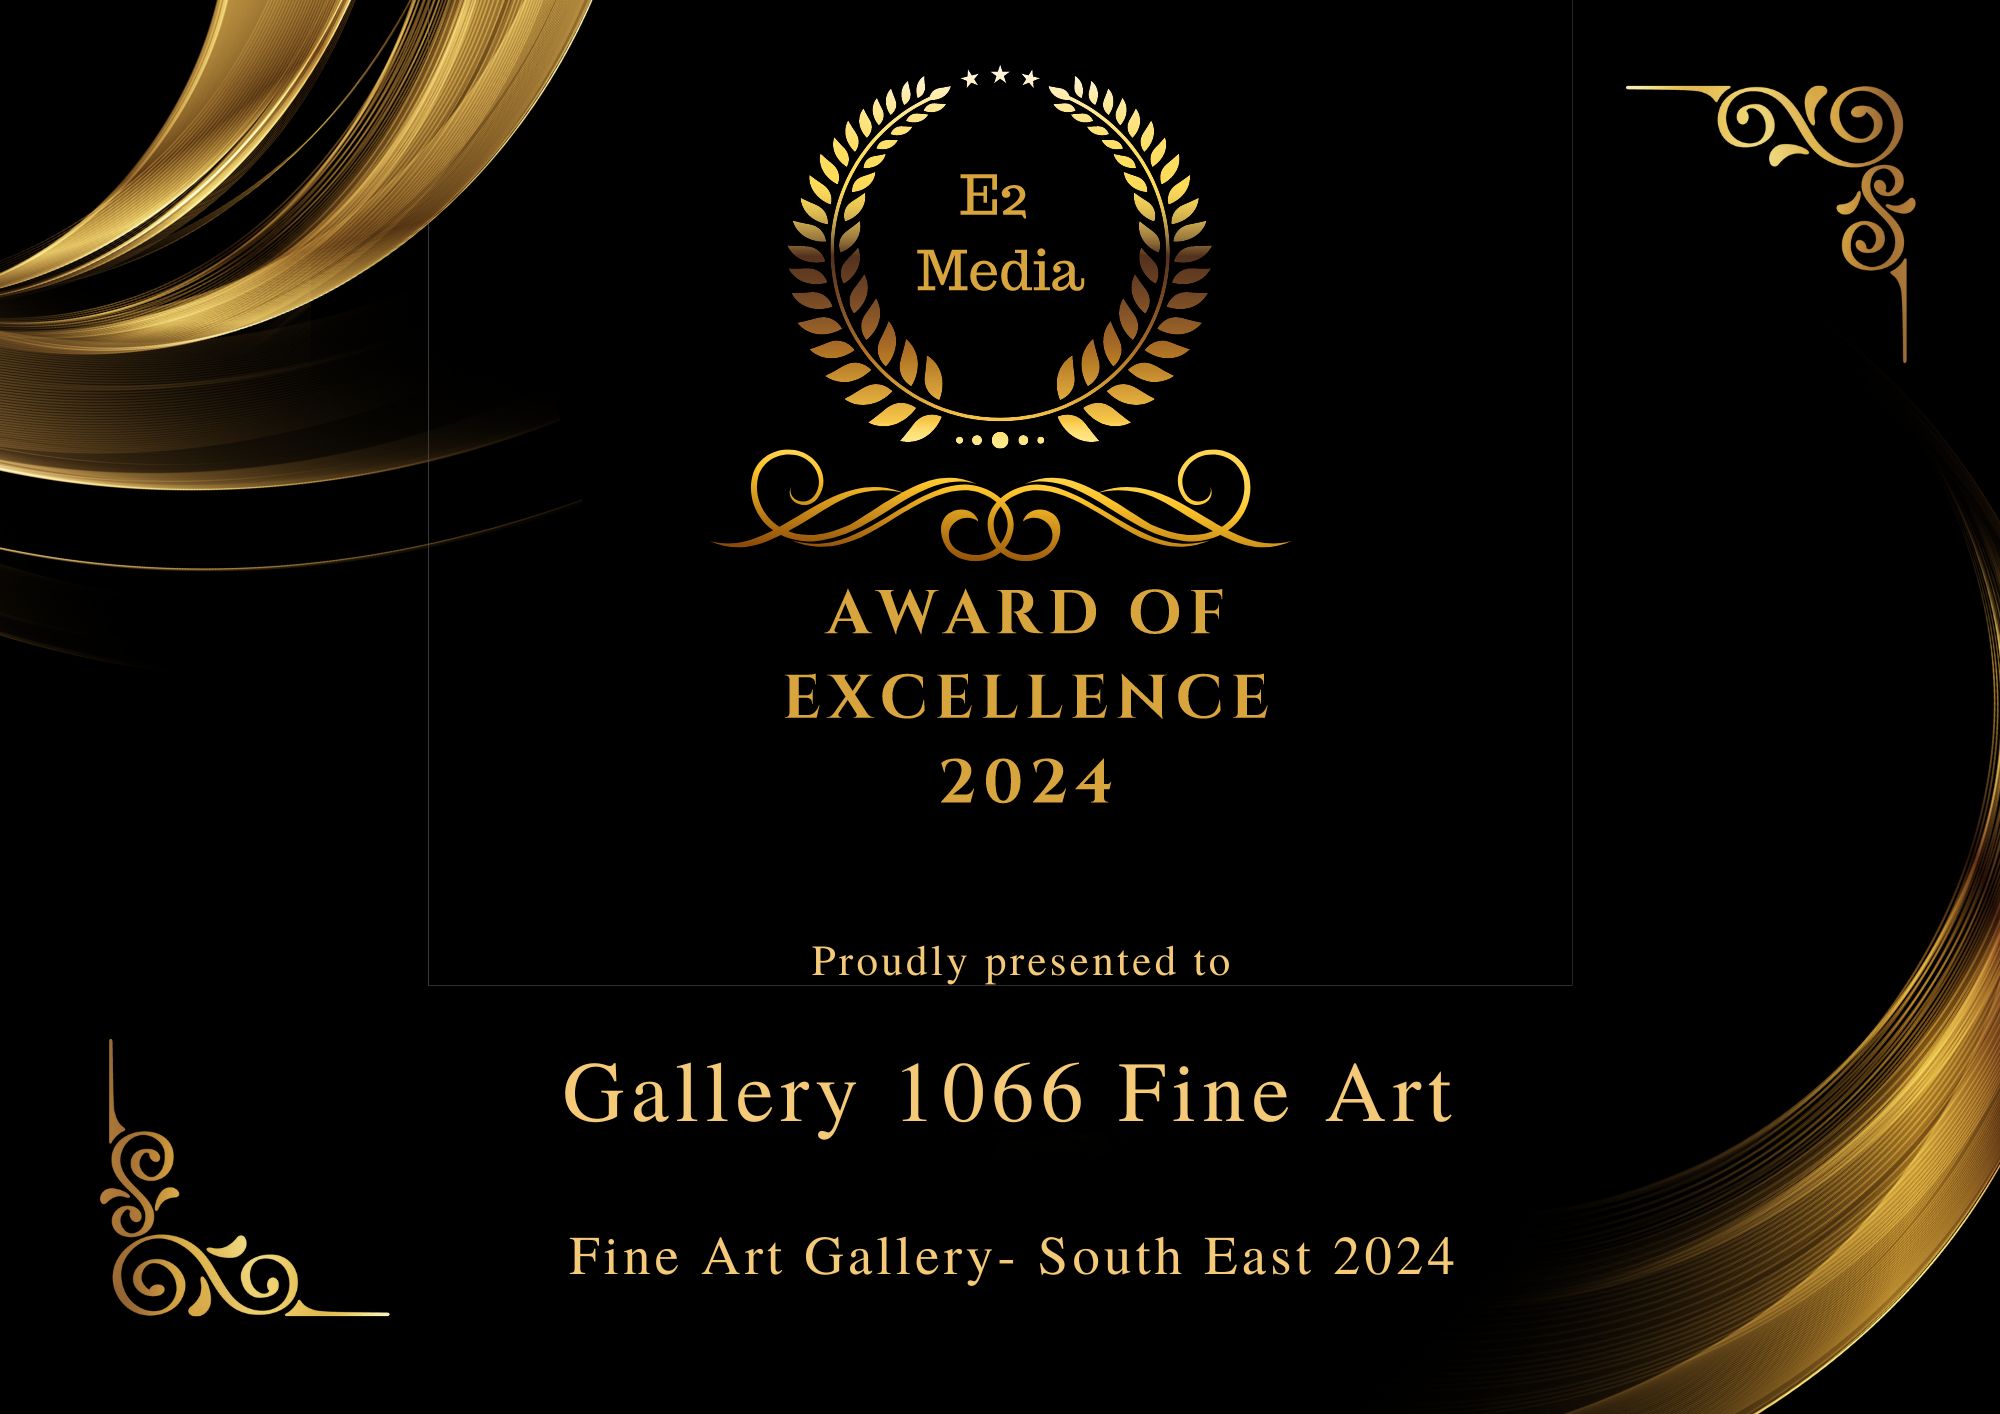  - We have won Award Of Excellence 2024 image